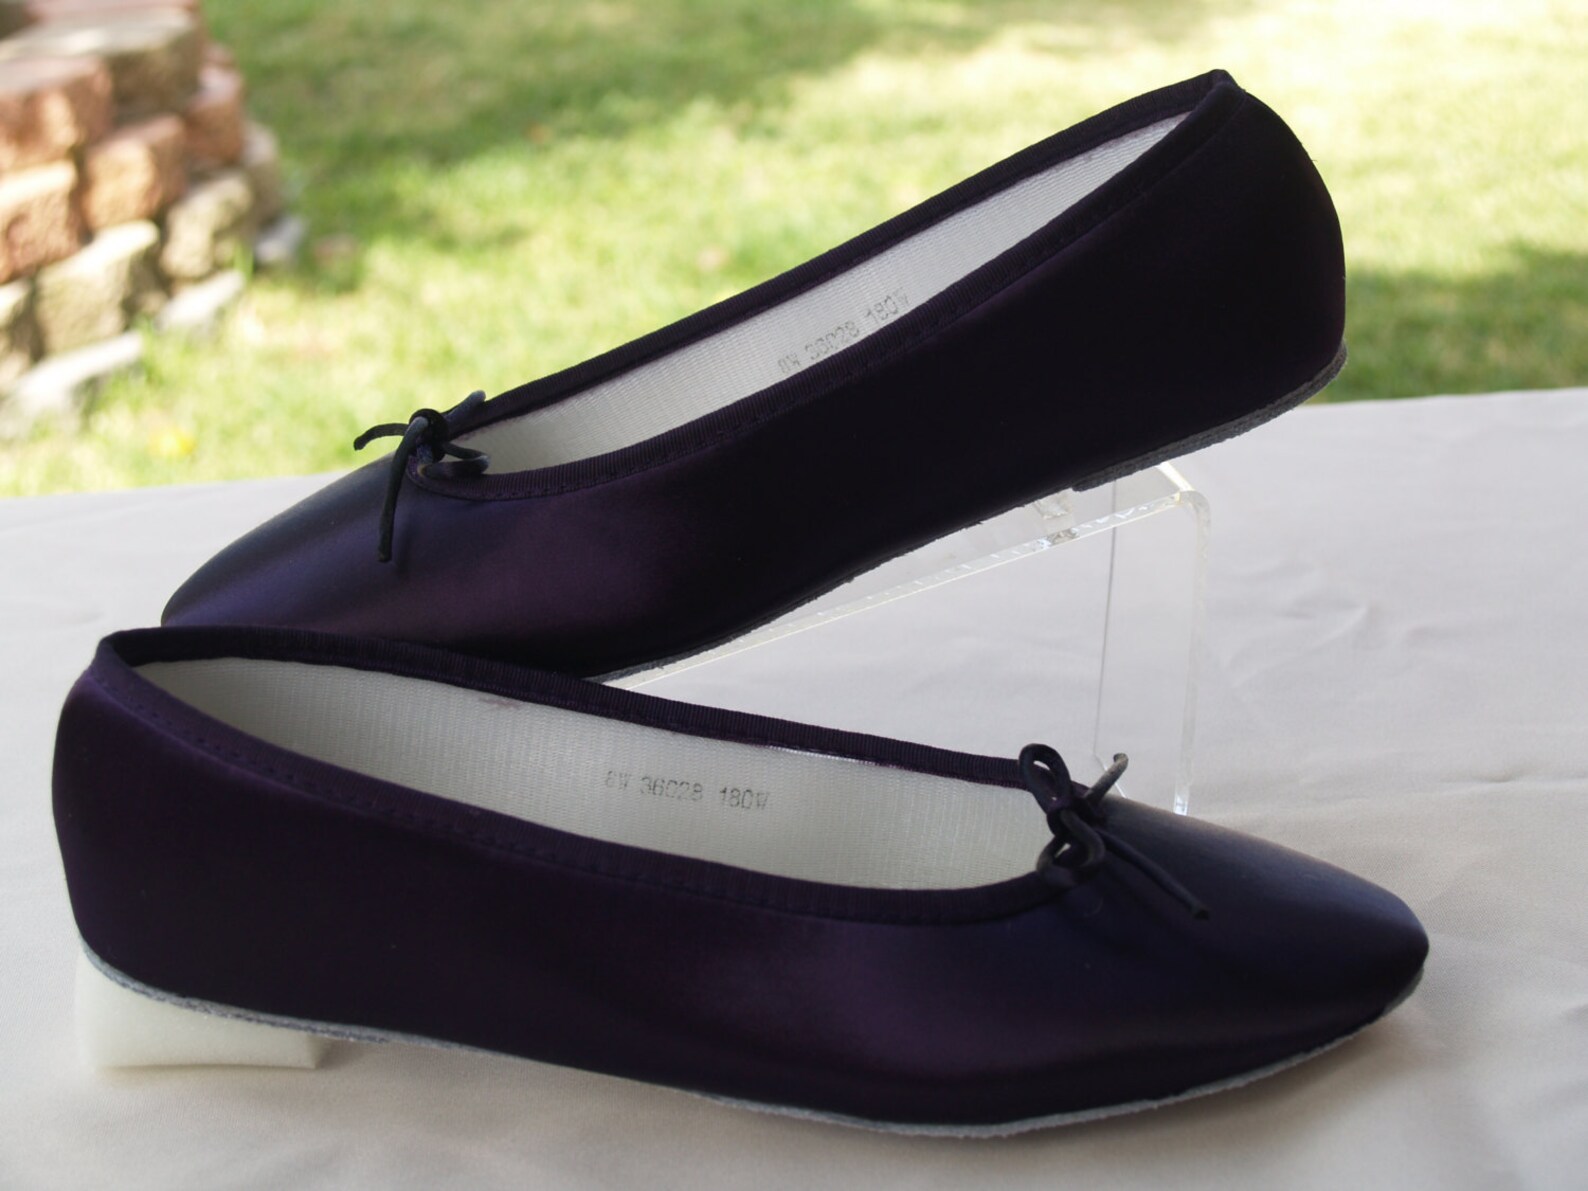 wedding dark eggplant shoes satin ballet style flat slipper, wedding shoes, bridesmaids, special occasion, comfort